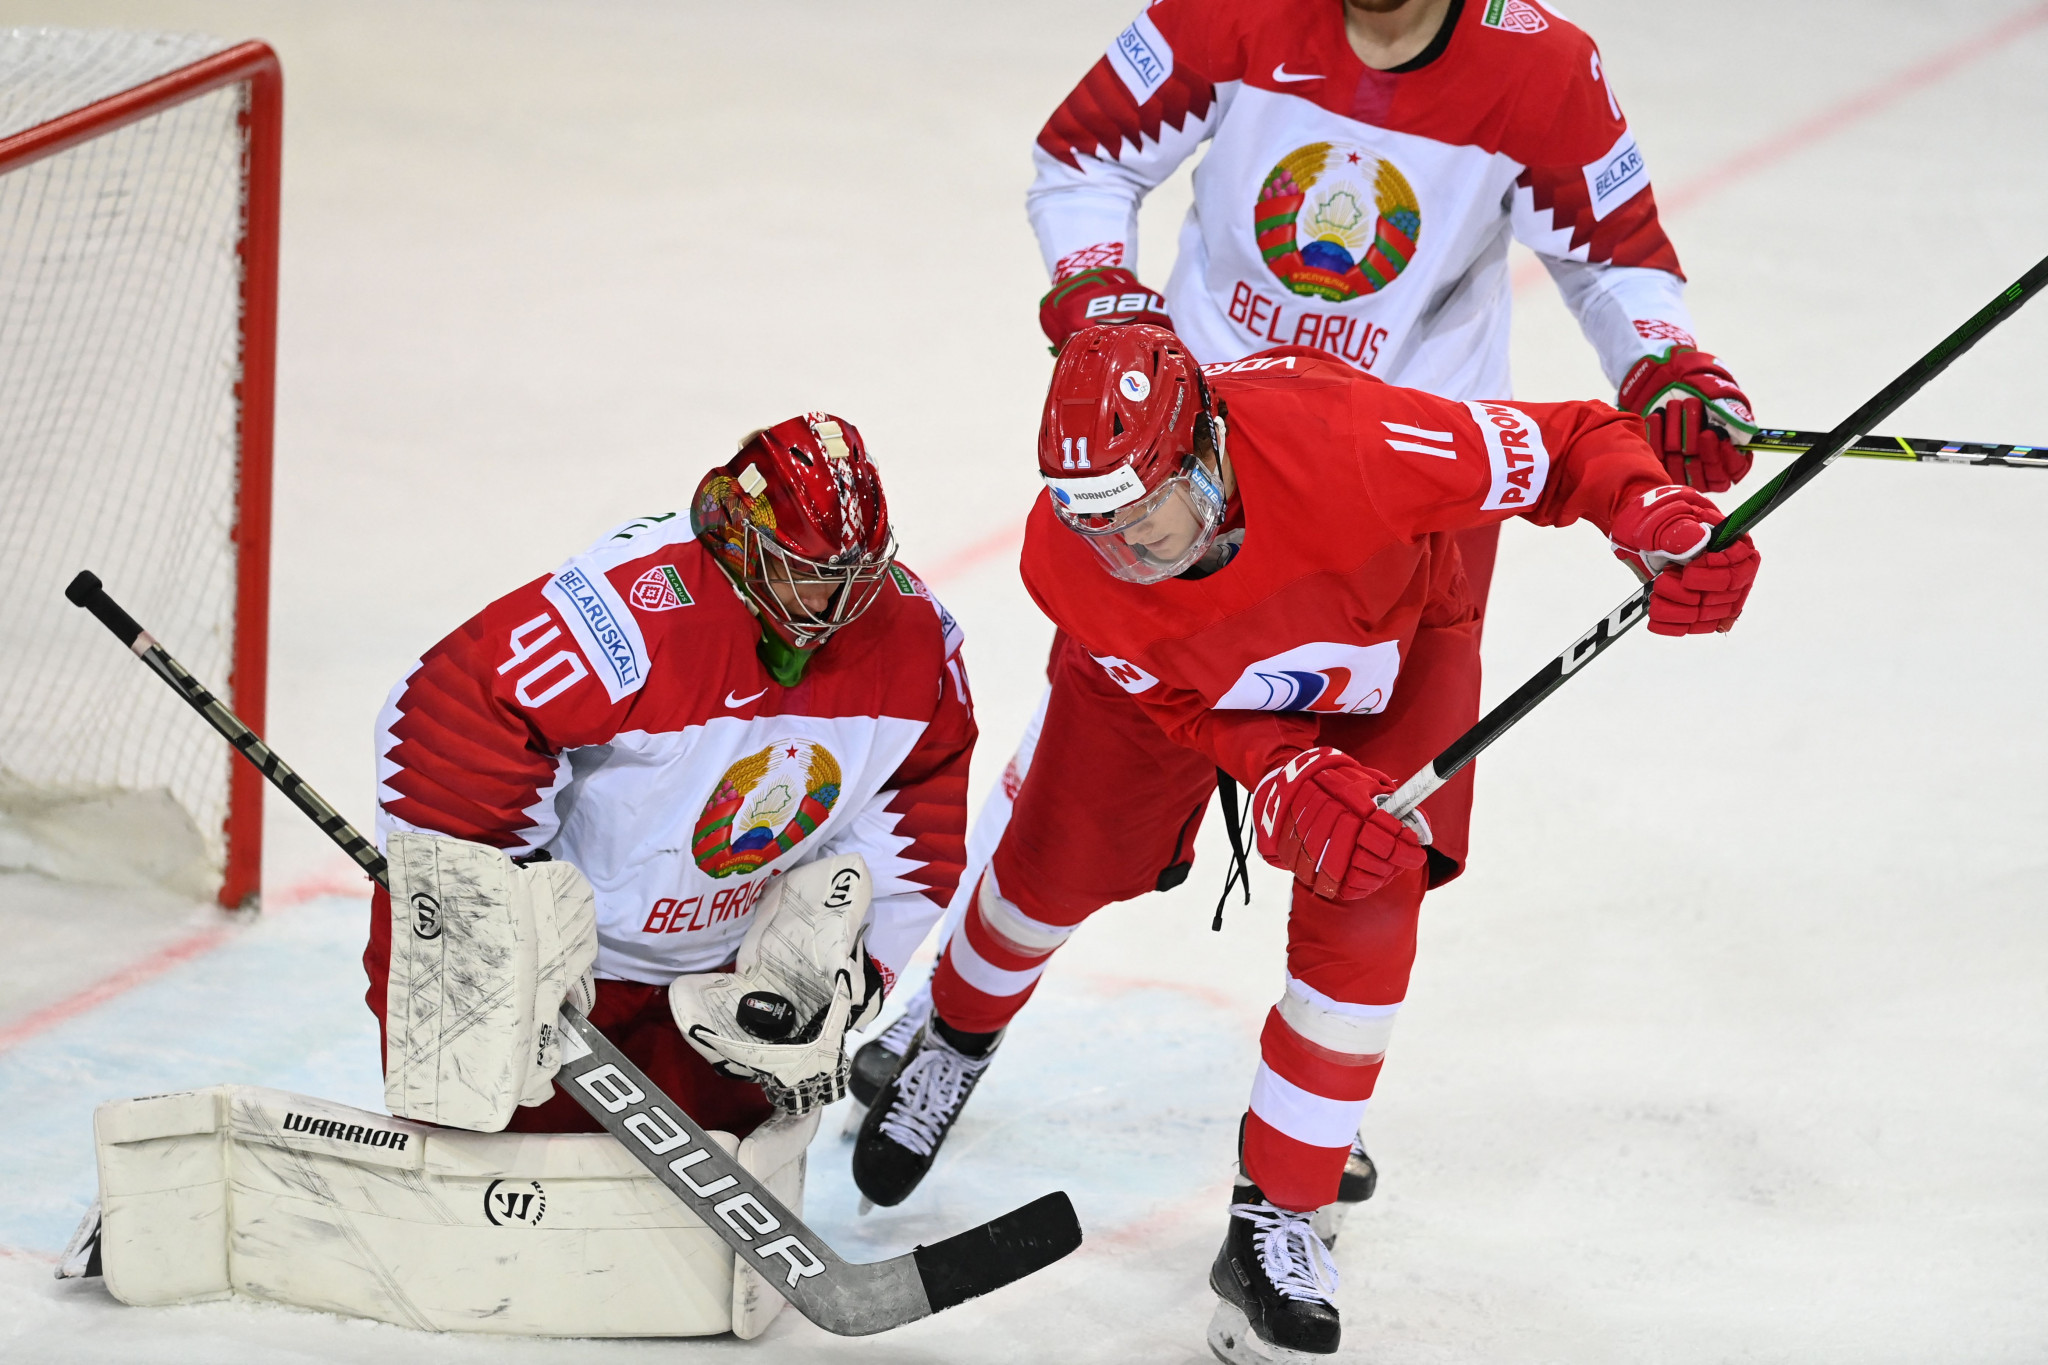 Russia and Belarus to play ice hockey friendlies in month of World Championship they are banned from